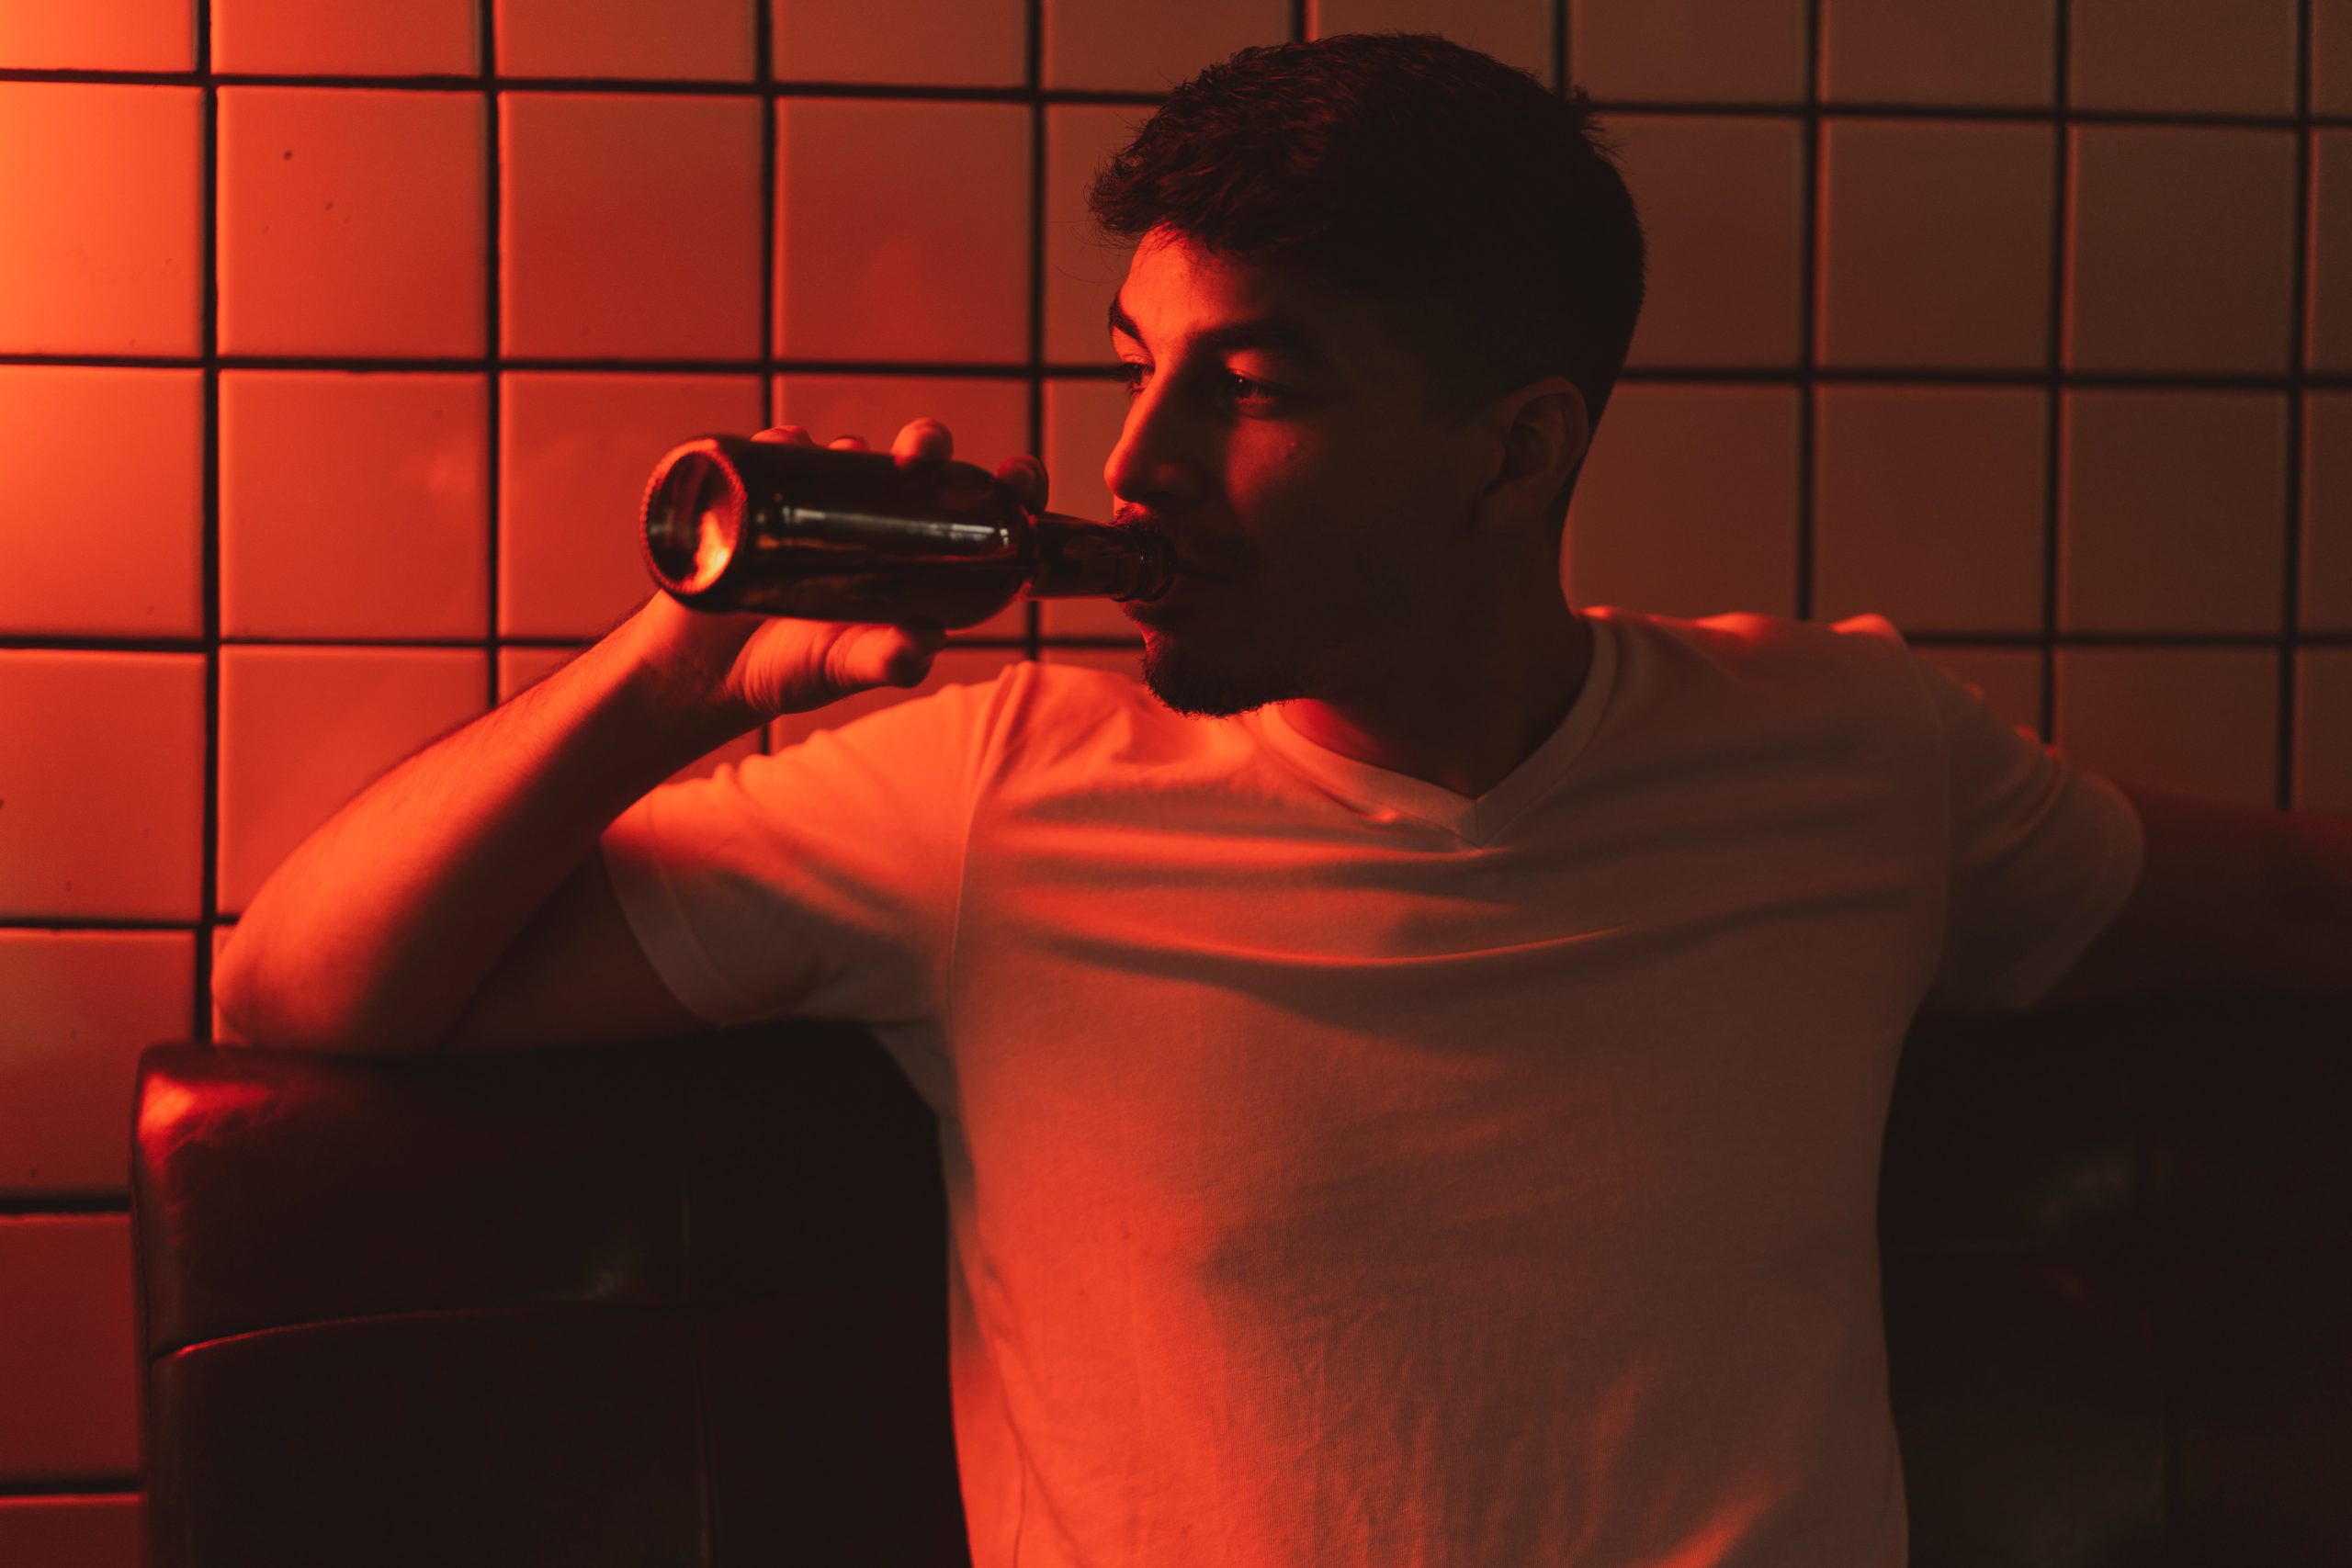 Man sitting in a room with red lighting drinking a beer